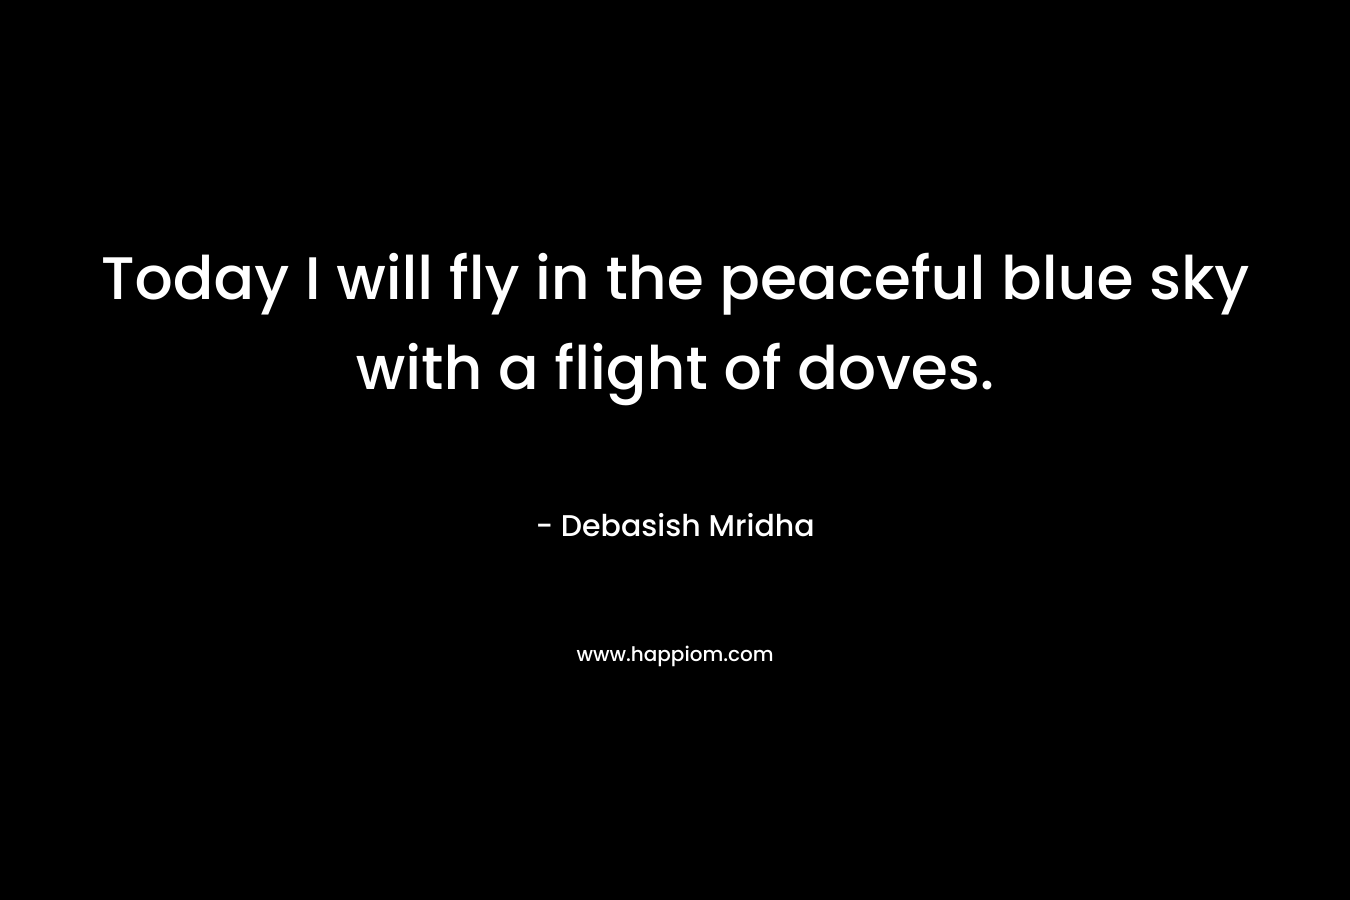 Today I will fly in the peaceful blue sky with a flight of doves.